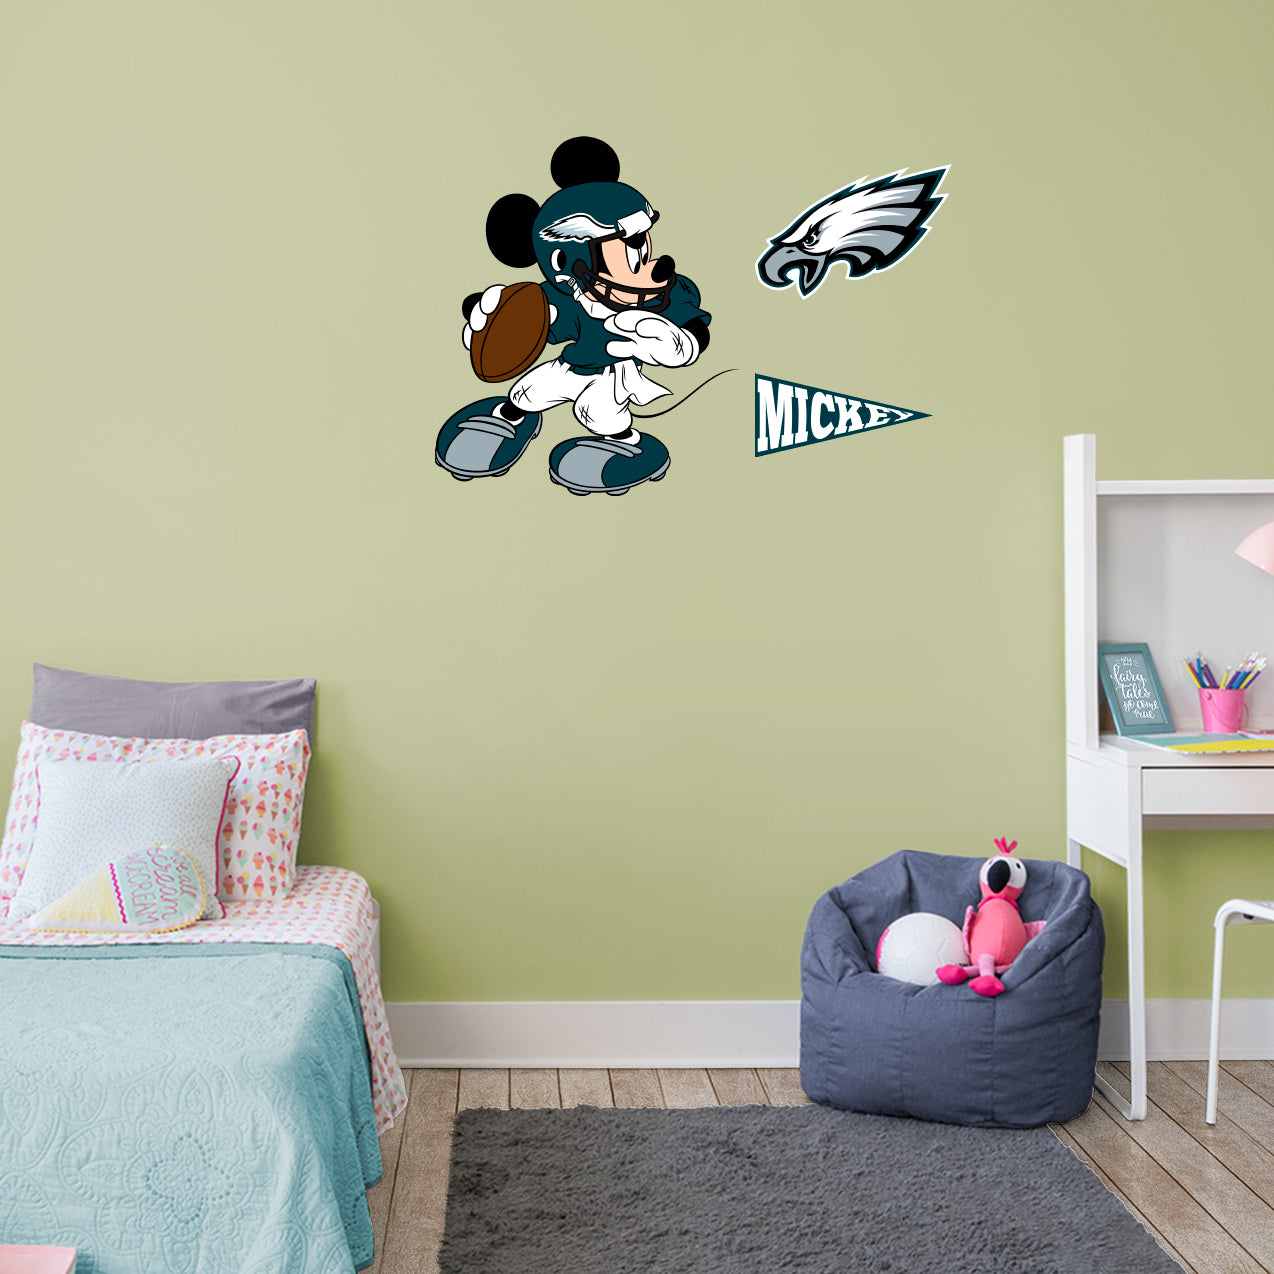 Philadelphia Eagles: Mickey Mouse - Officially Licensed NFL Removable Adhesive Decal